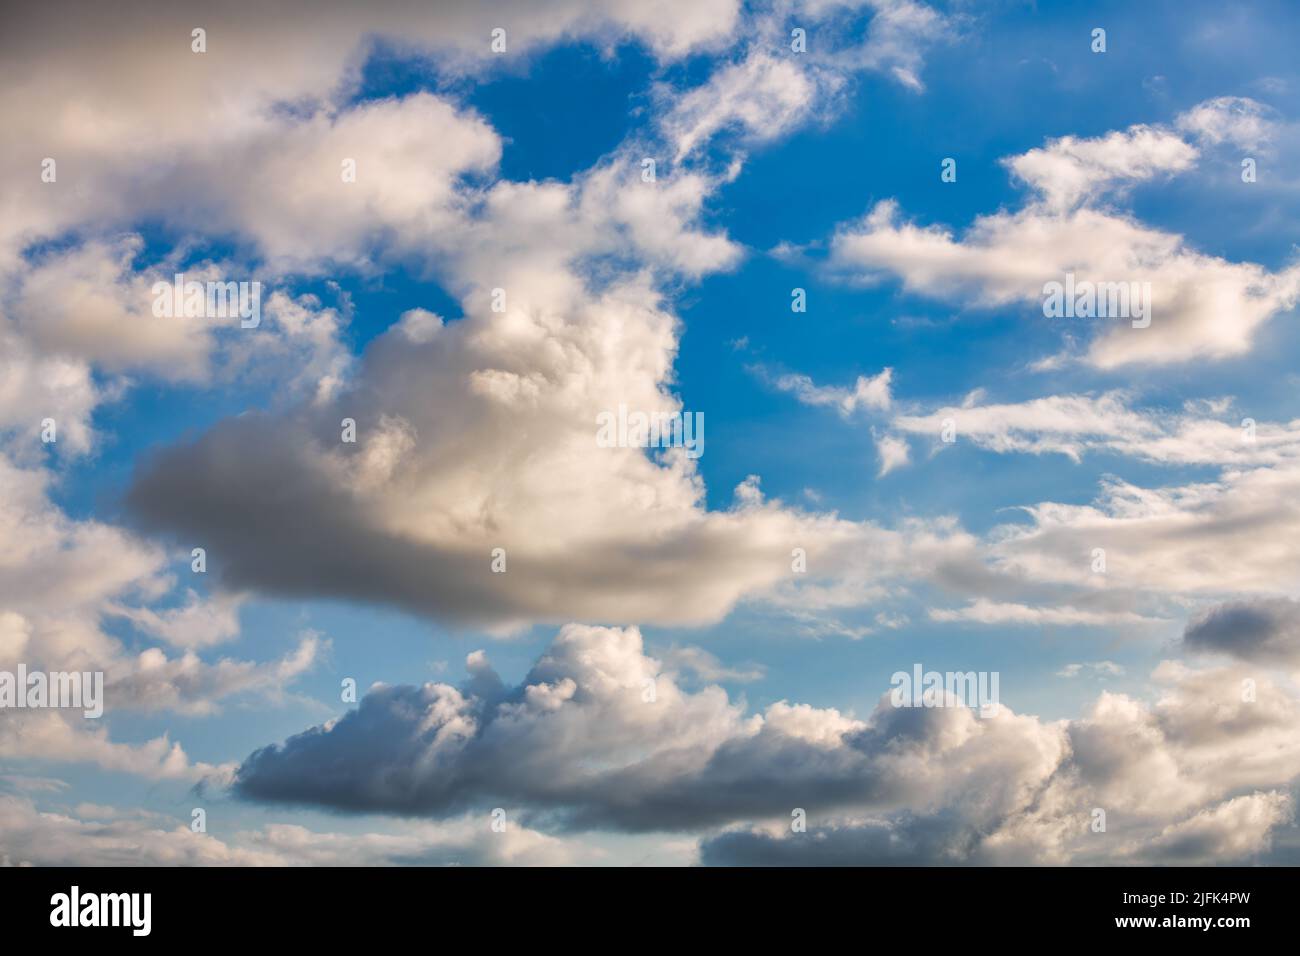 A Detailed Image Of White Fluffy Cumulus Clouds Set Against A Blue Daytime Sky Stock Photo